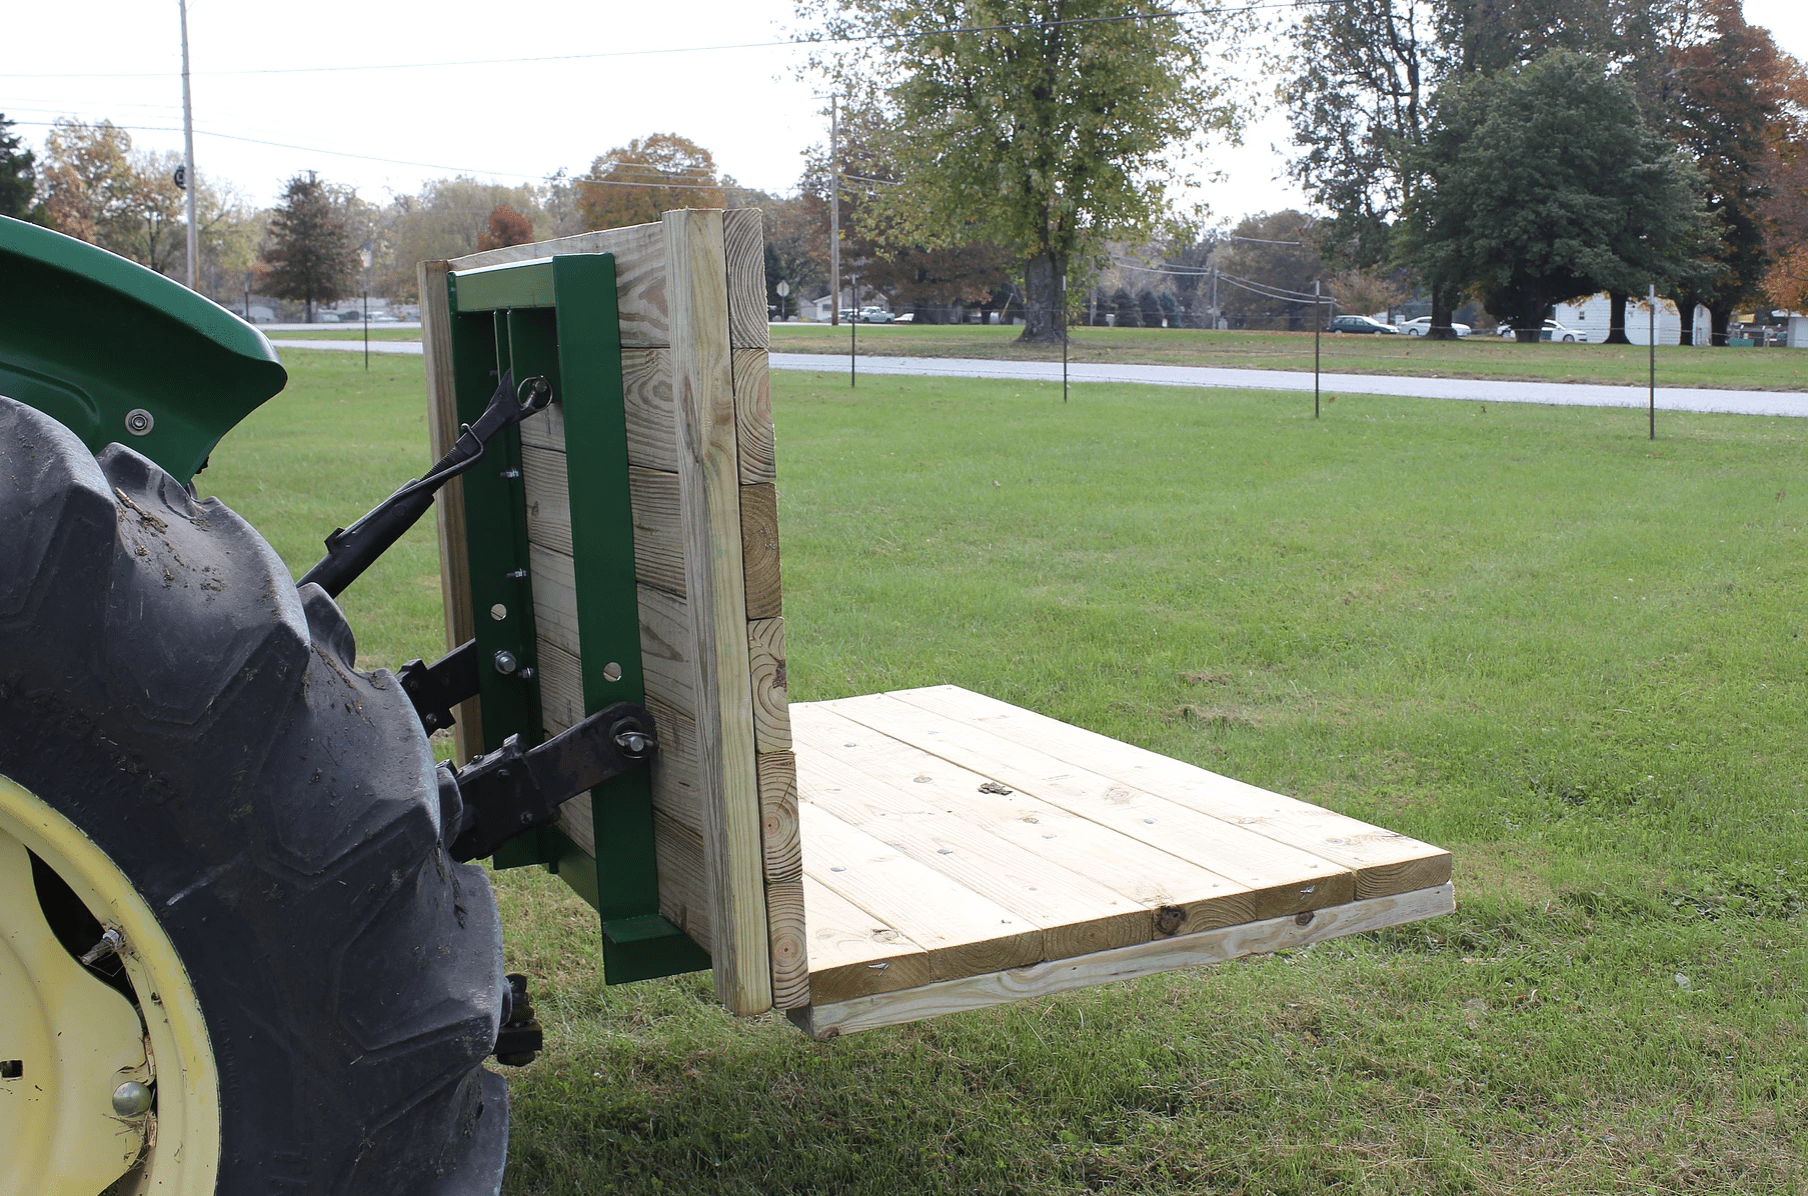 3-Point Carry All with a wooden pallet